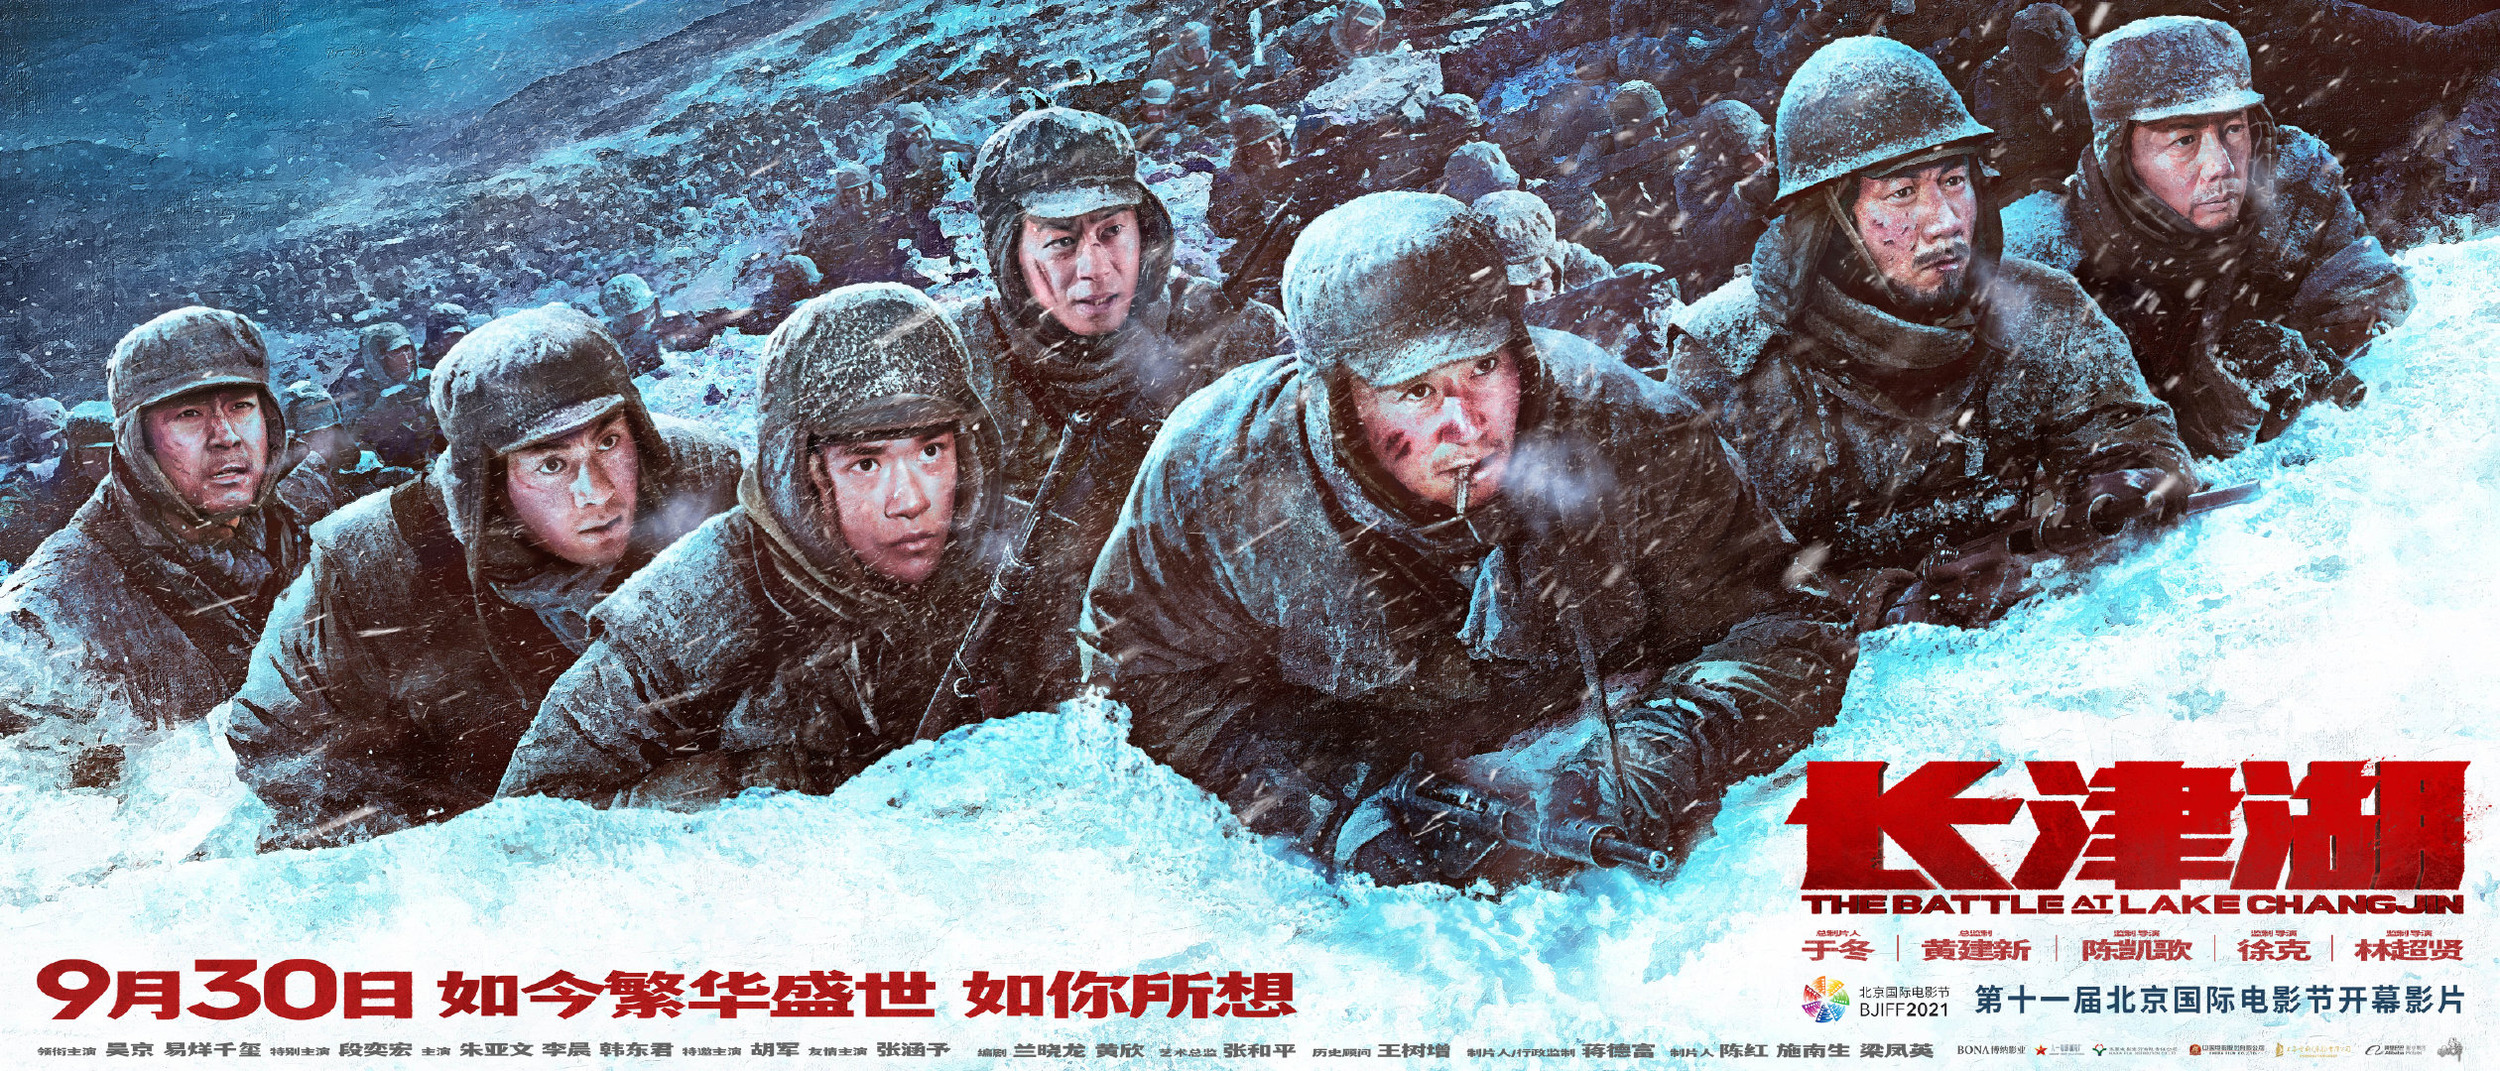 Mega Sized Movie Poster Image for The Battle at Lake Changjin (#20 of 24)